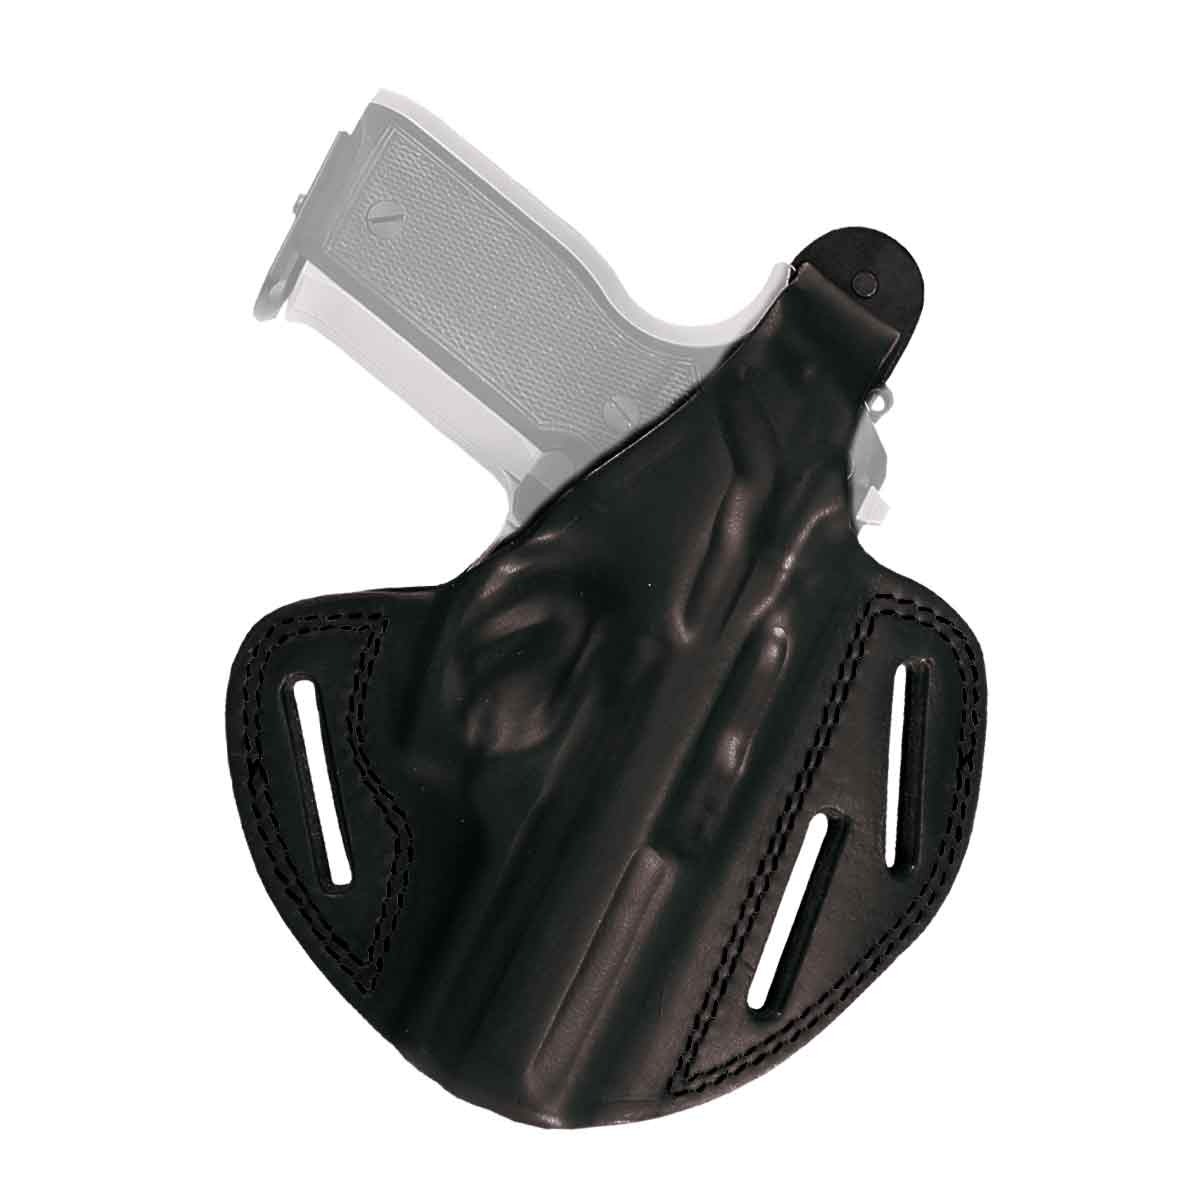 Pancake holster with two carrying positions 2" Colt...